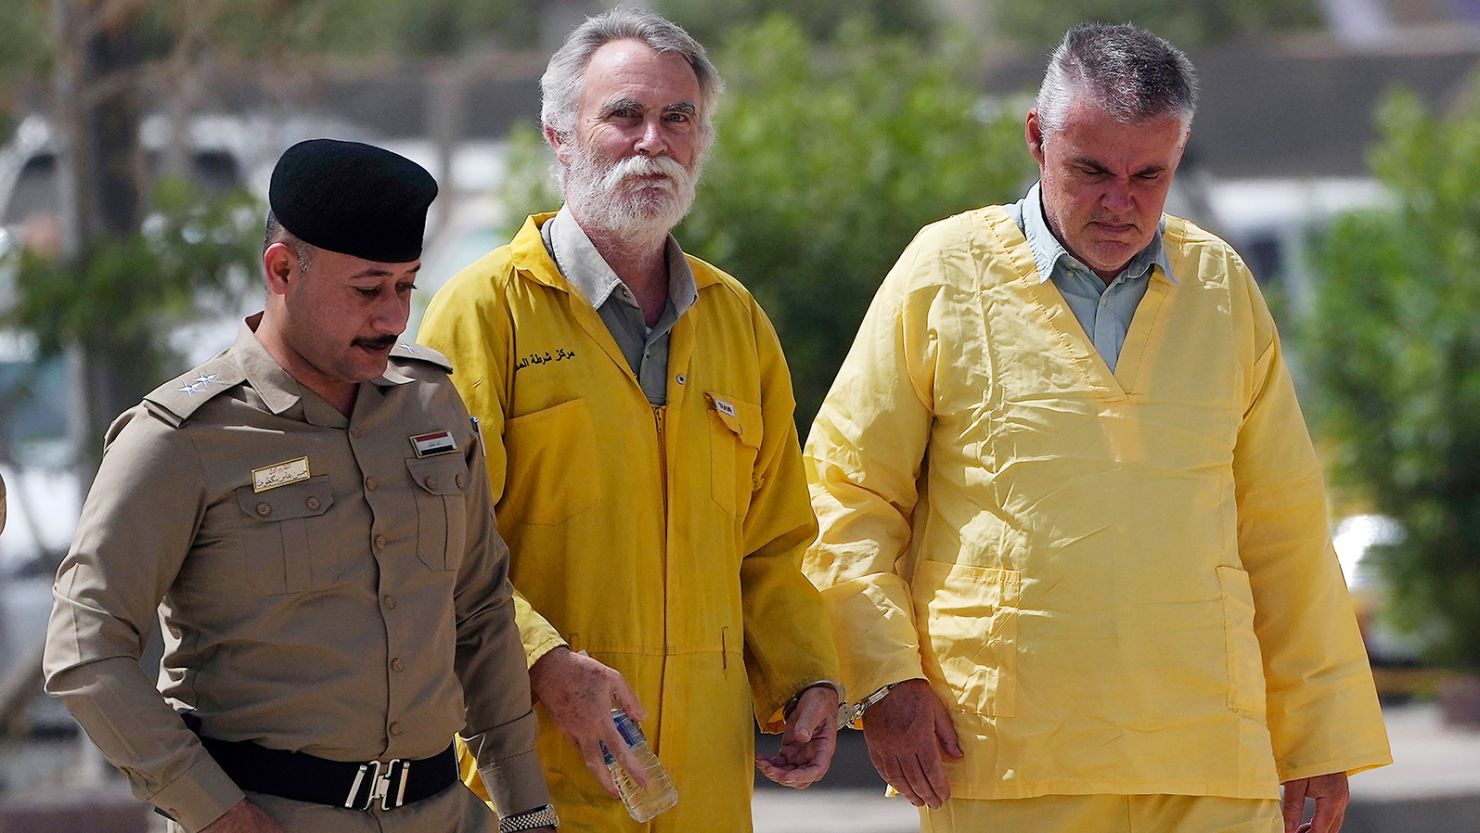 Volker Waldmann, right, and Jim Fitton, center, are handcuffed as they walk to a courtroom escorted by police arriving to court in Baghdad, Iraq, Sunday, May 22, 2022. Waldmann and Fitton have been accused of smuggling ancient shards out of Iraq.